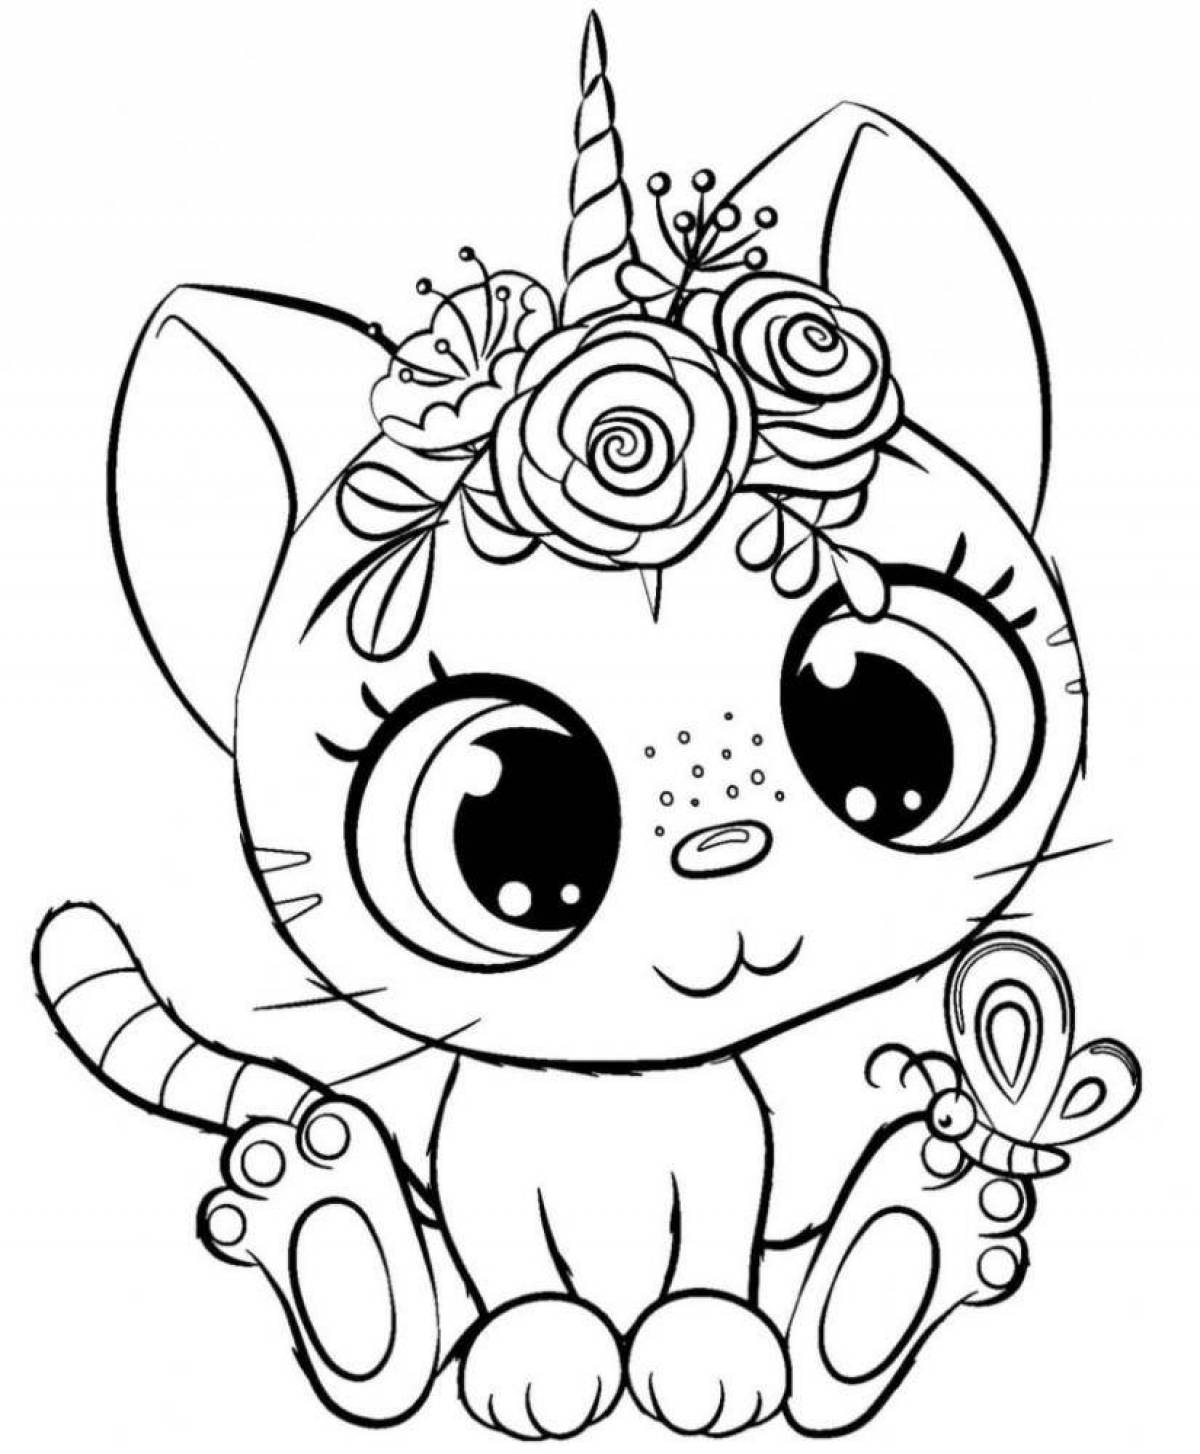 Rainbow coloring butterfly unicorn cat